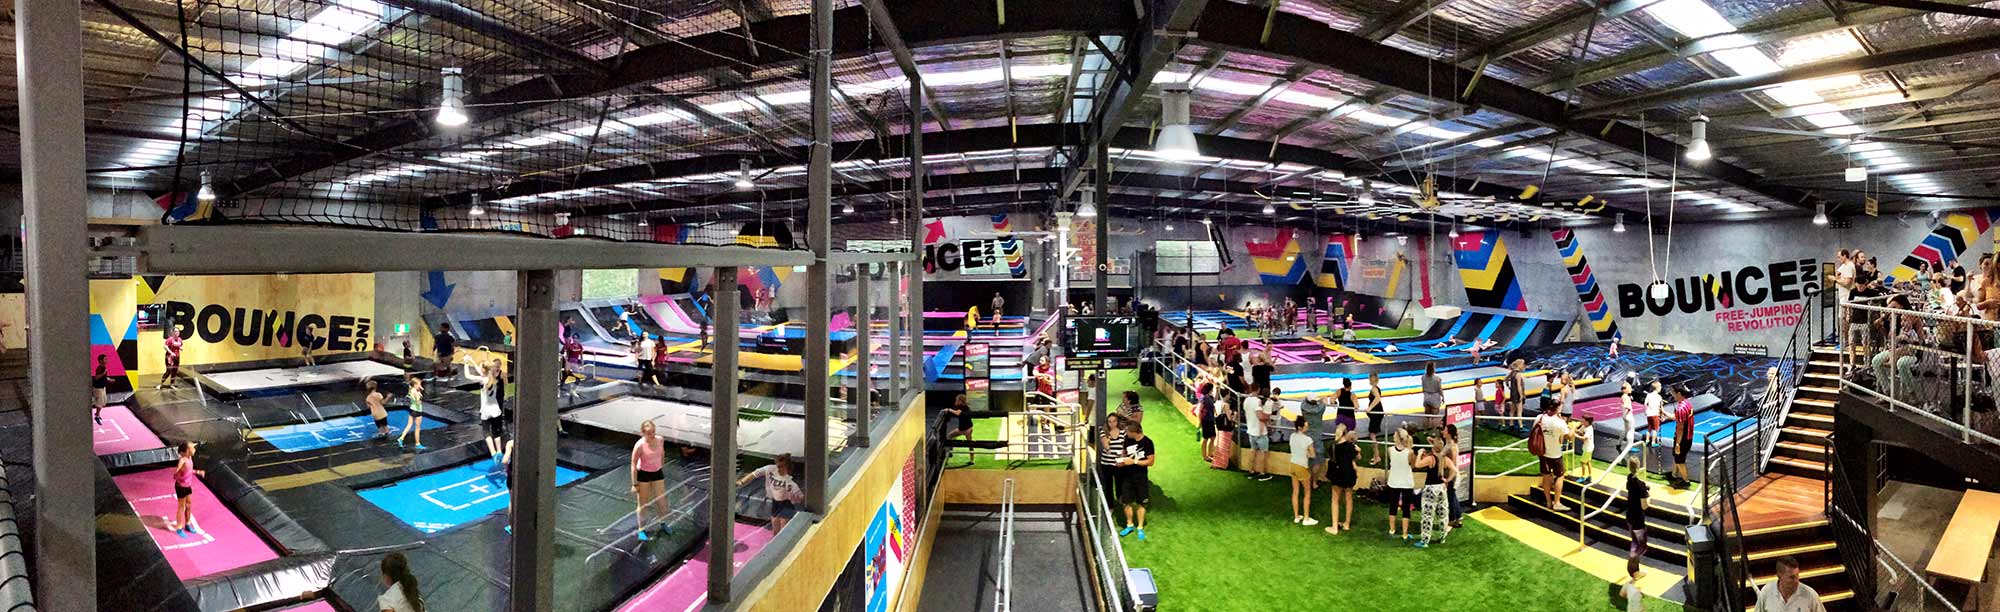 BOUNCE Inc Locations | Trampoline Places Near Me | BOUNCE ...